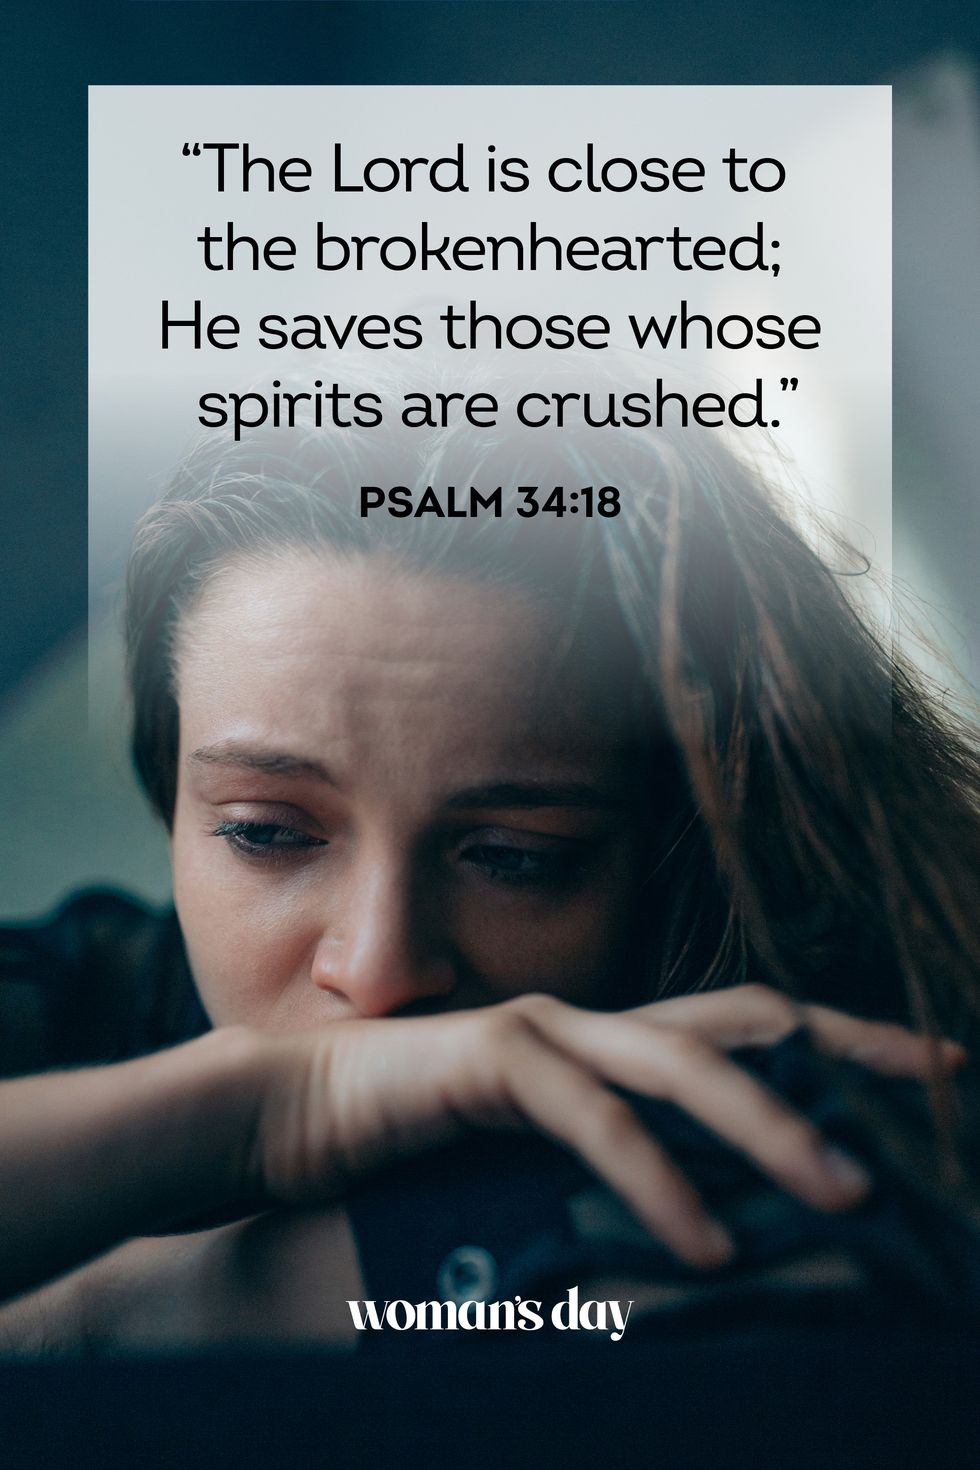 35 Bible Verses About Grief — Bible Verses to Help Cope With Loss